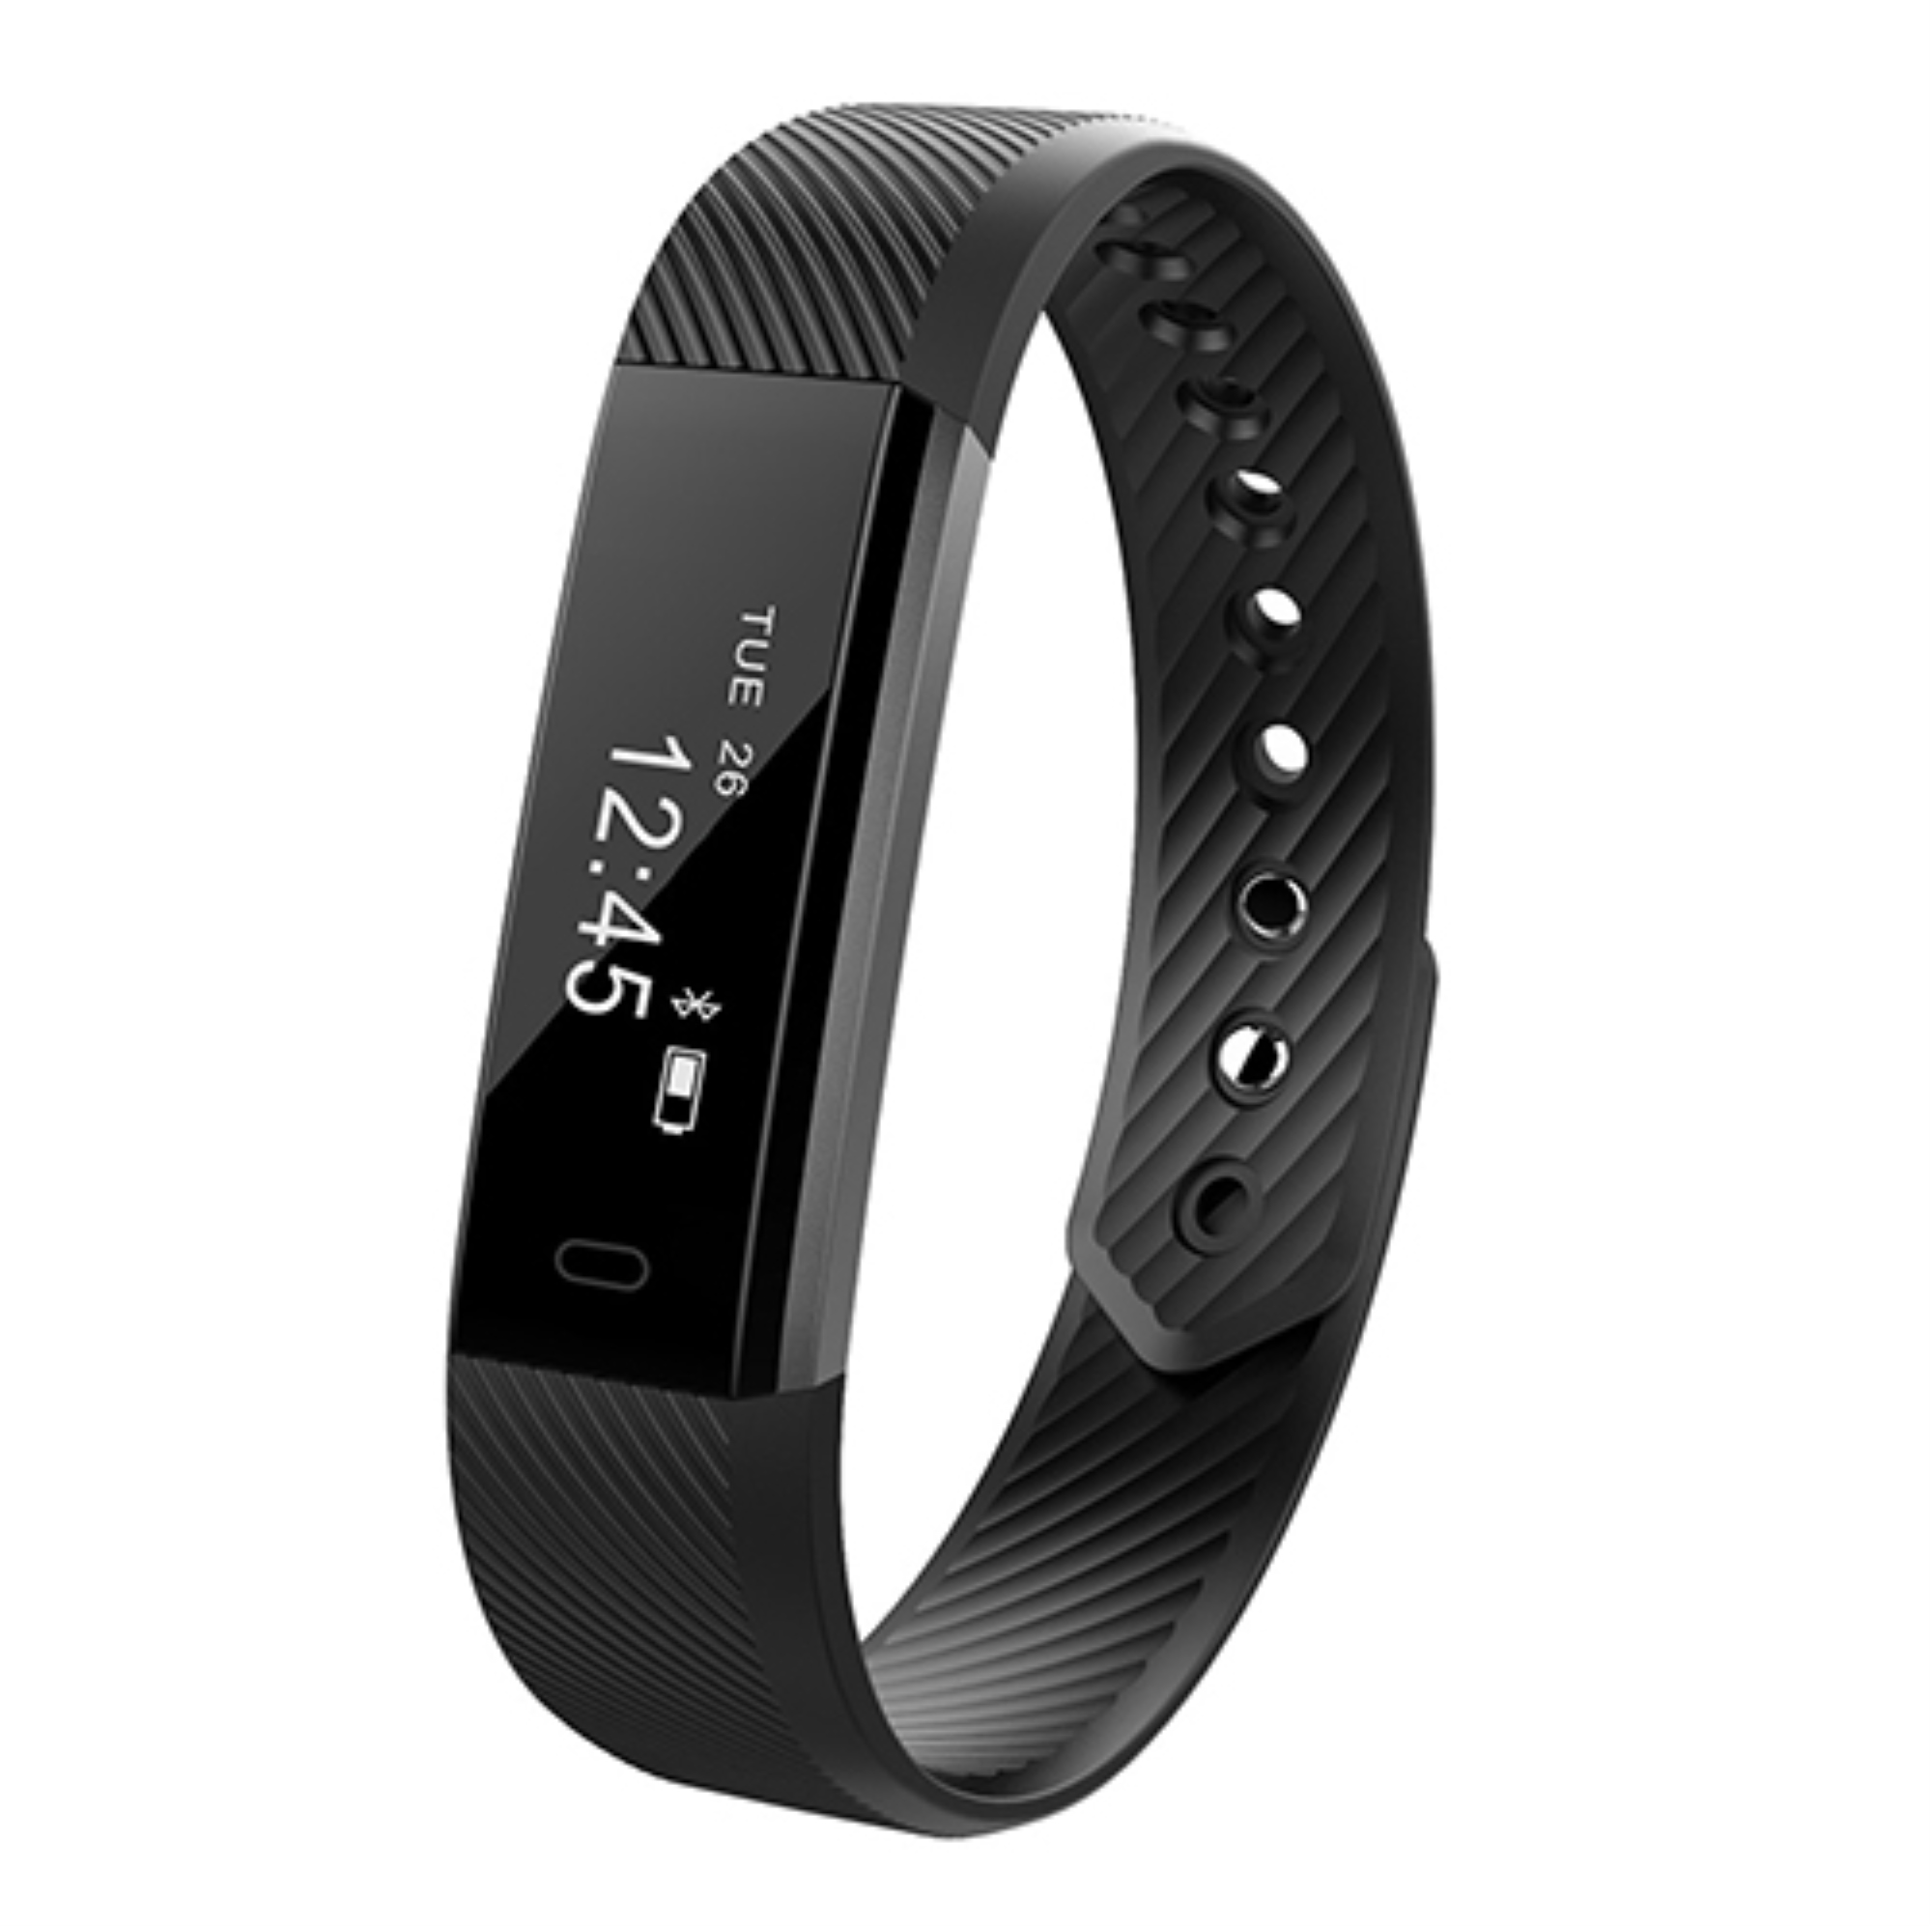 ❁ ID115 Fitness Smart Band Activity Tracking Bluetooth Sports Wristband with Pedometer Sleep Monitoring Support Android IOS PK mi3